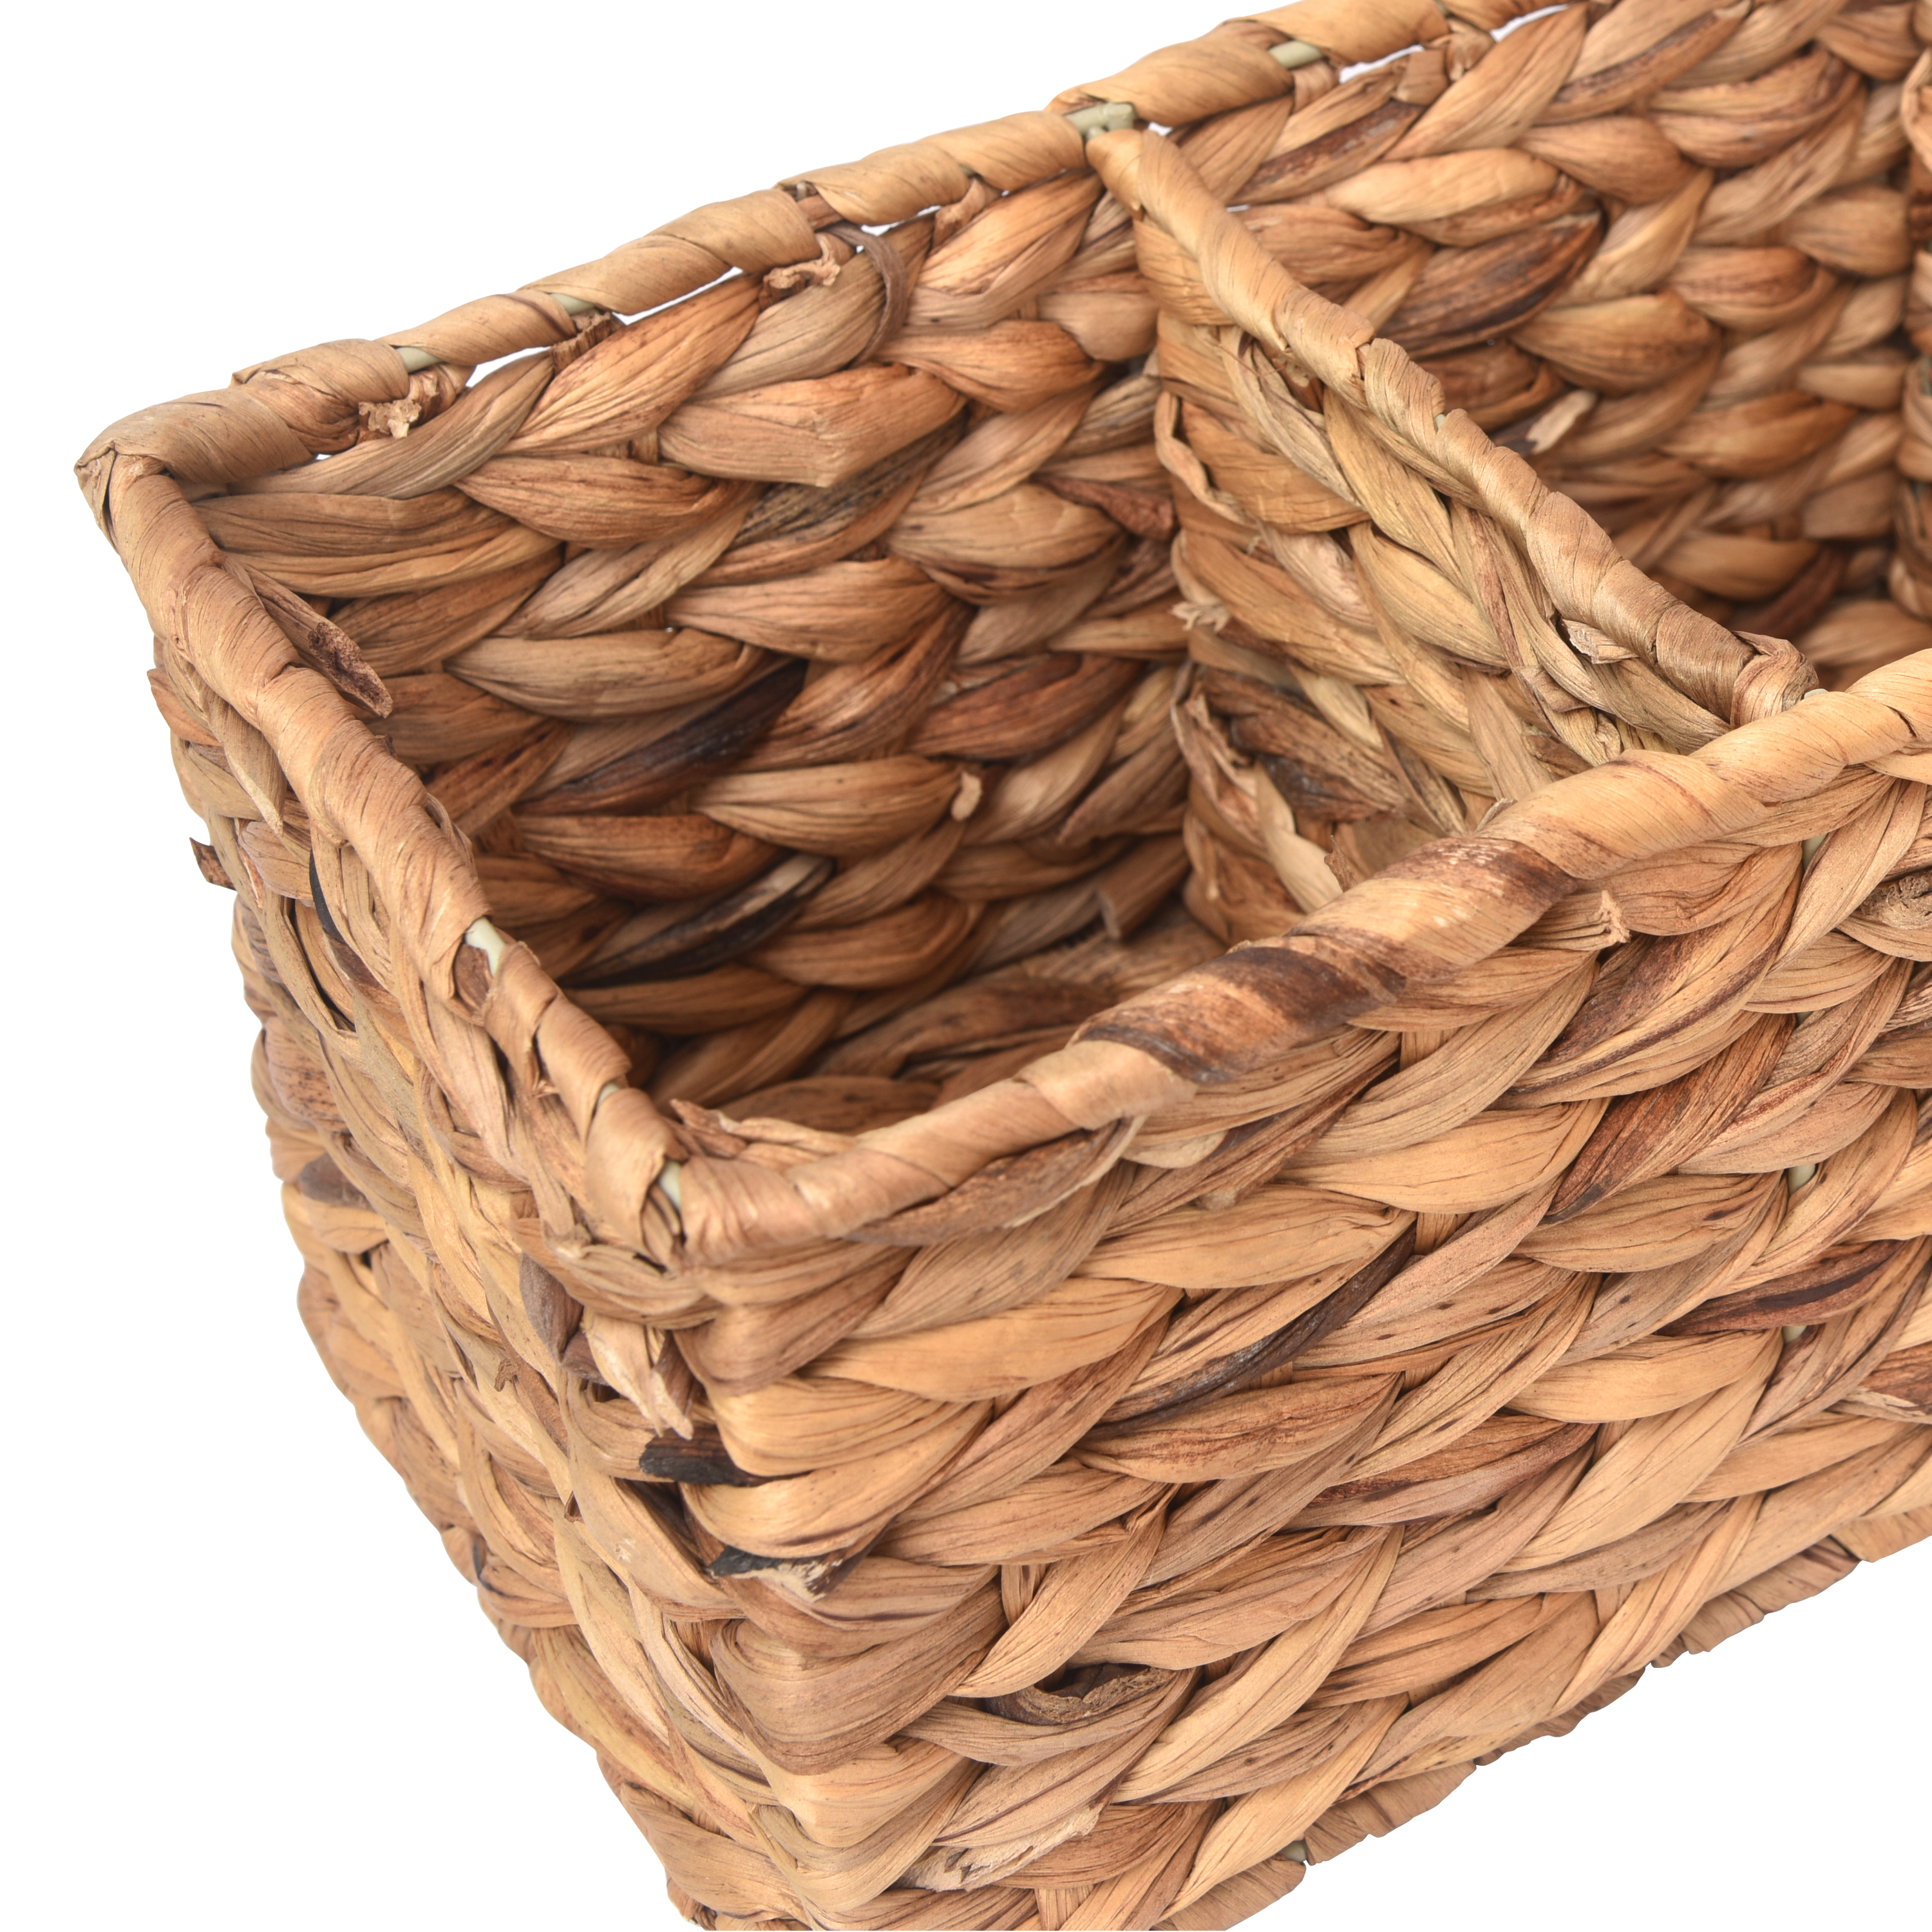 Better Homes & Gardens Woven Water Hyacinth Tank Basket, Natural - image 5 of 6